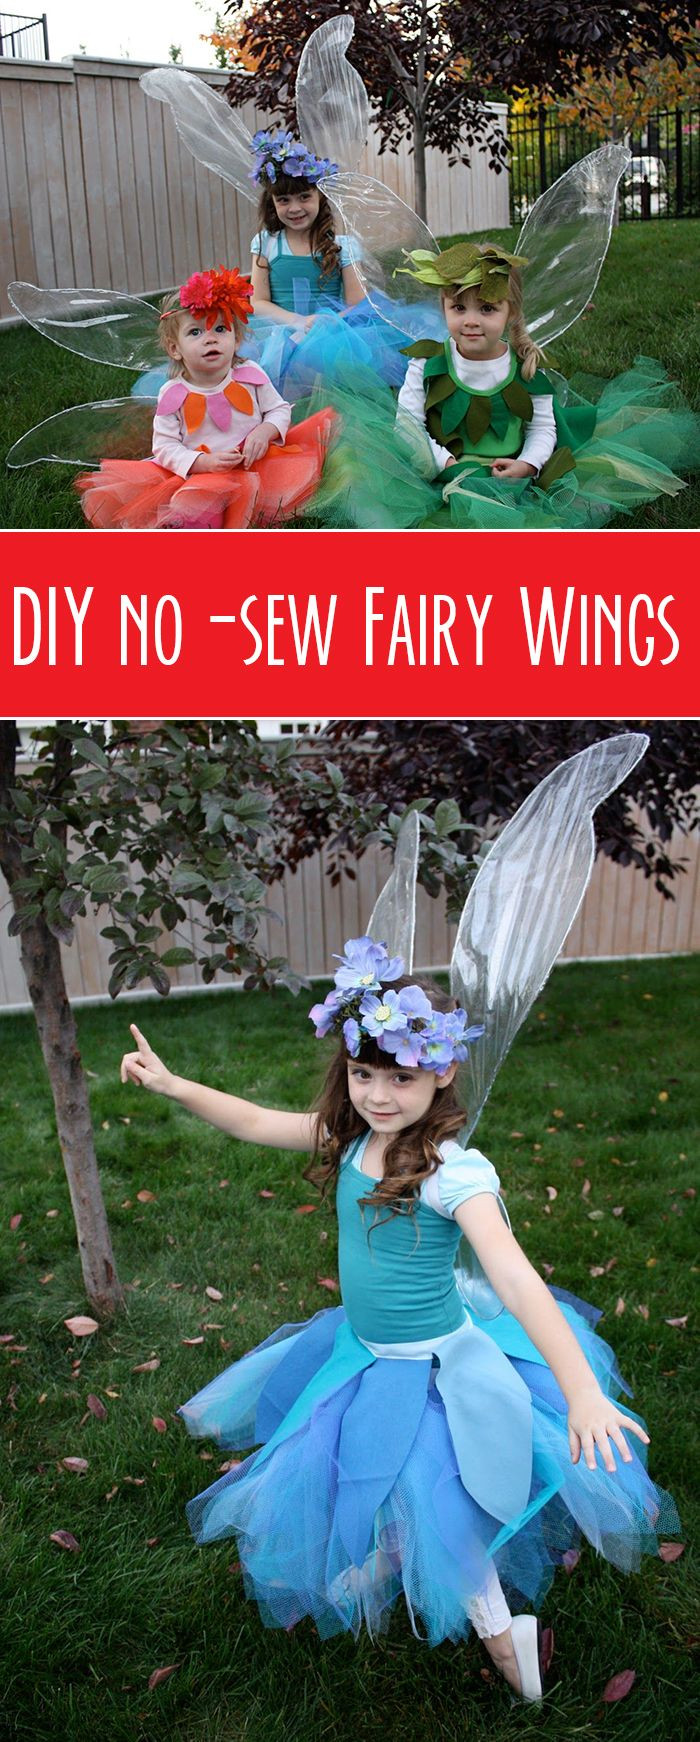 DIY Fairy Costumes For Kids
 DIY no sew fairy wings